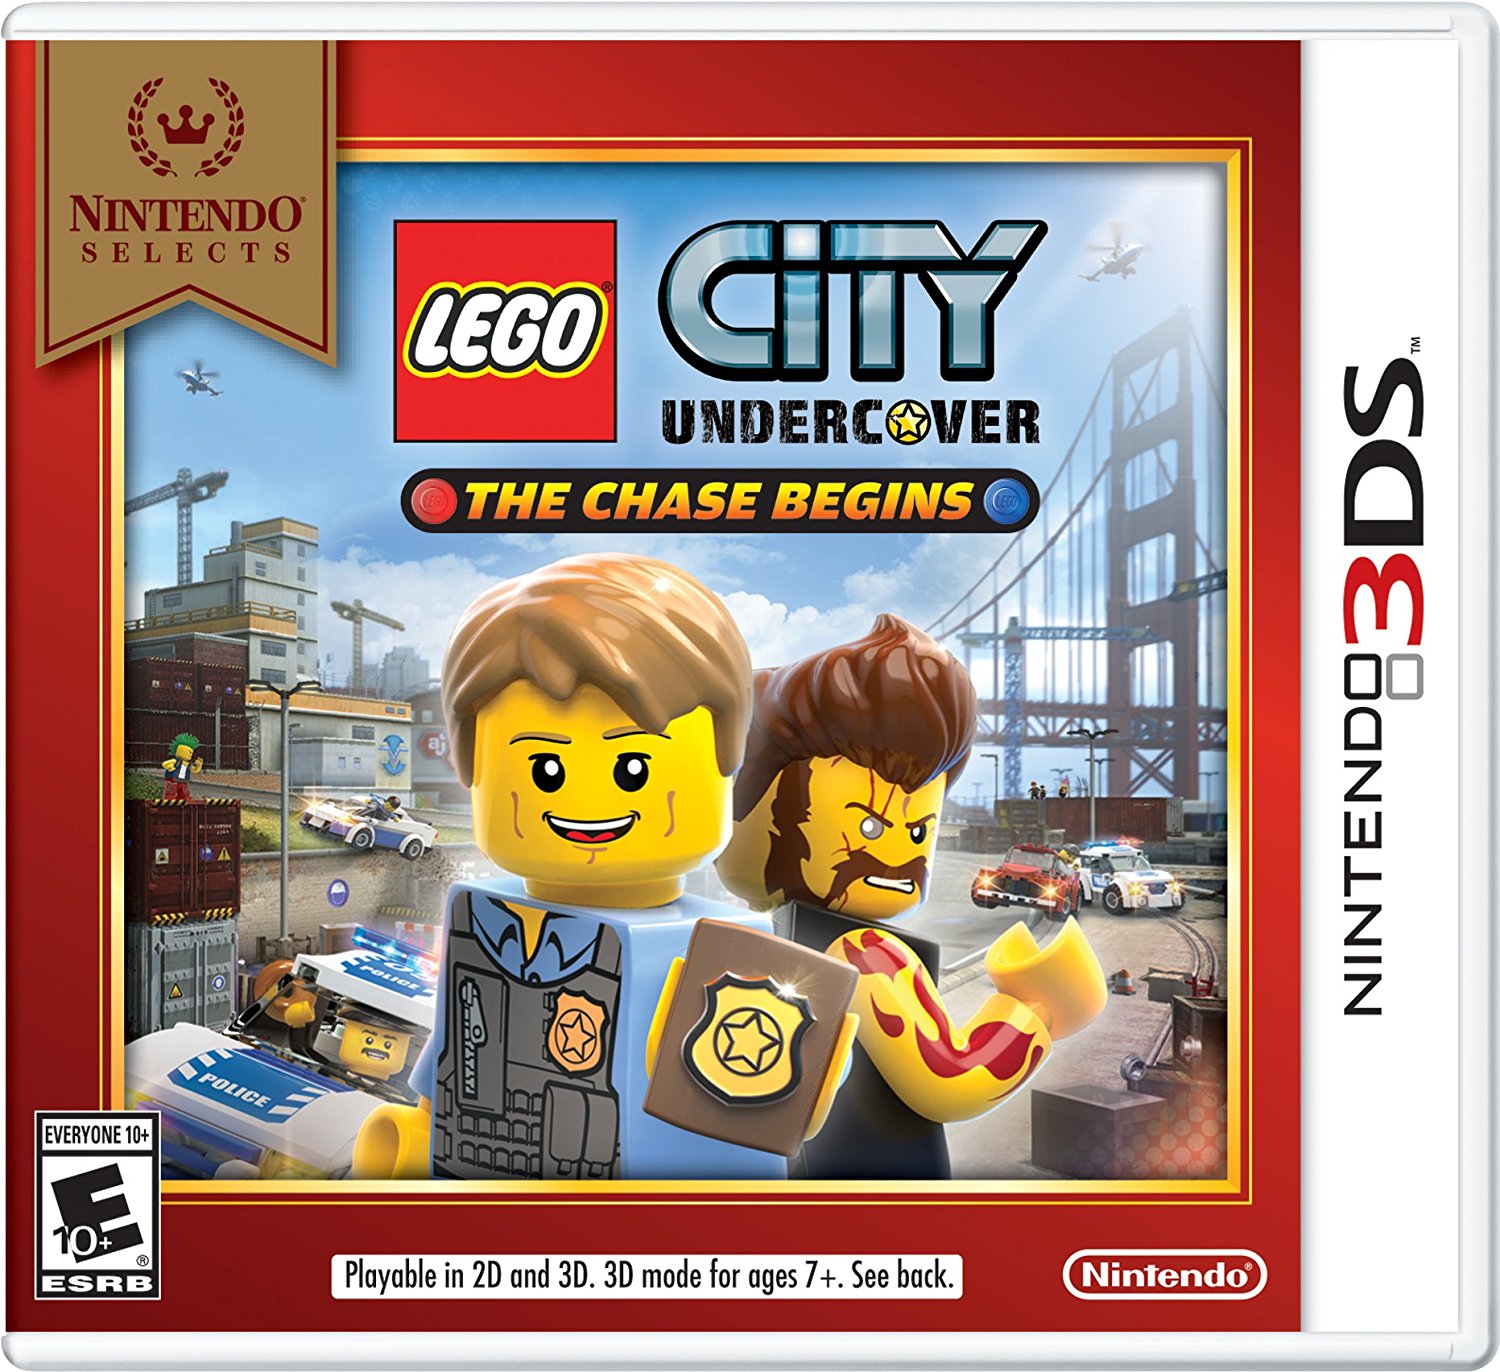 Nintendo Slcts Lego City Undercover 3d - image 1 of 5